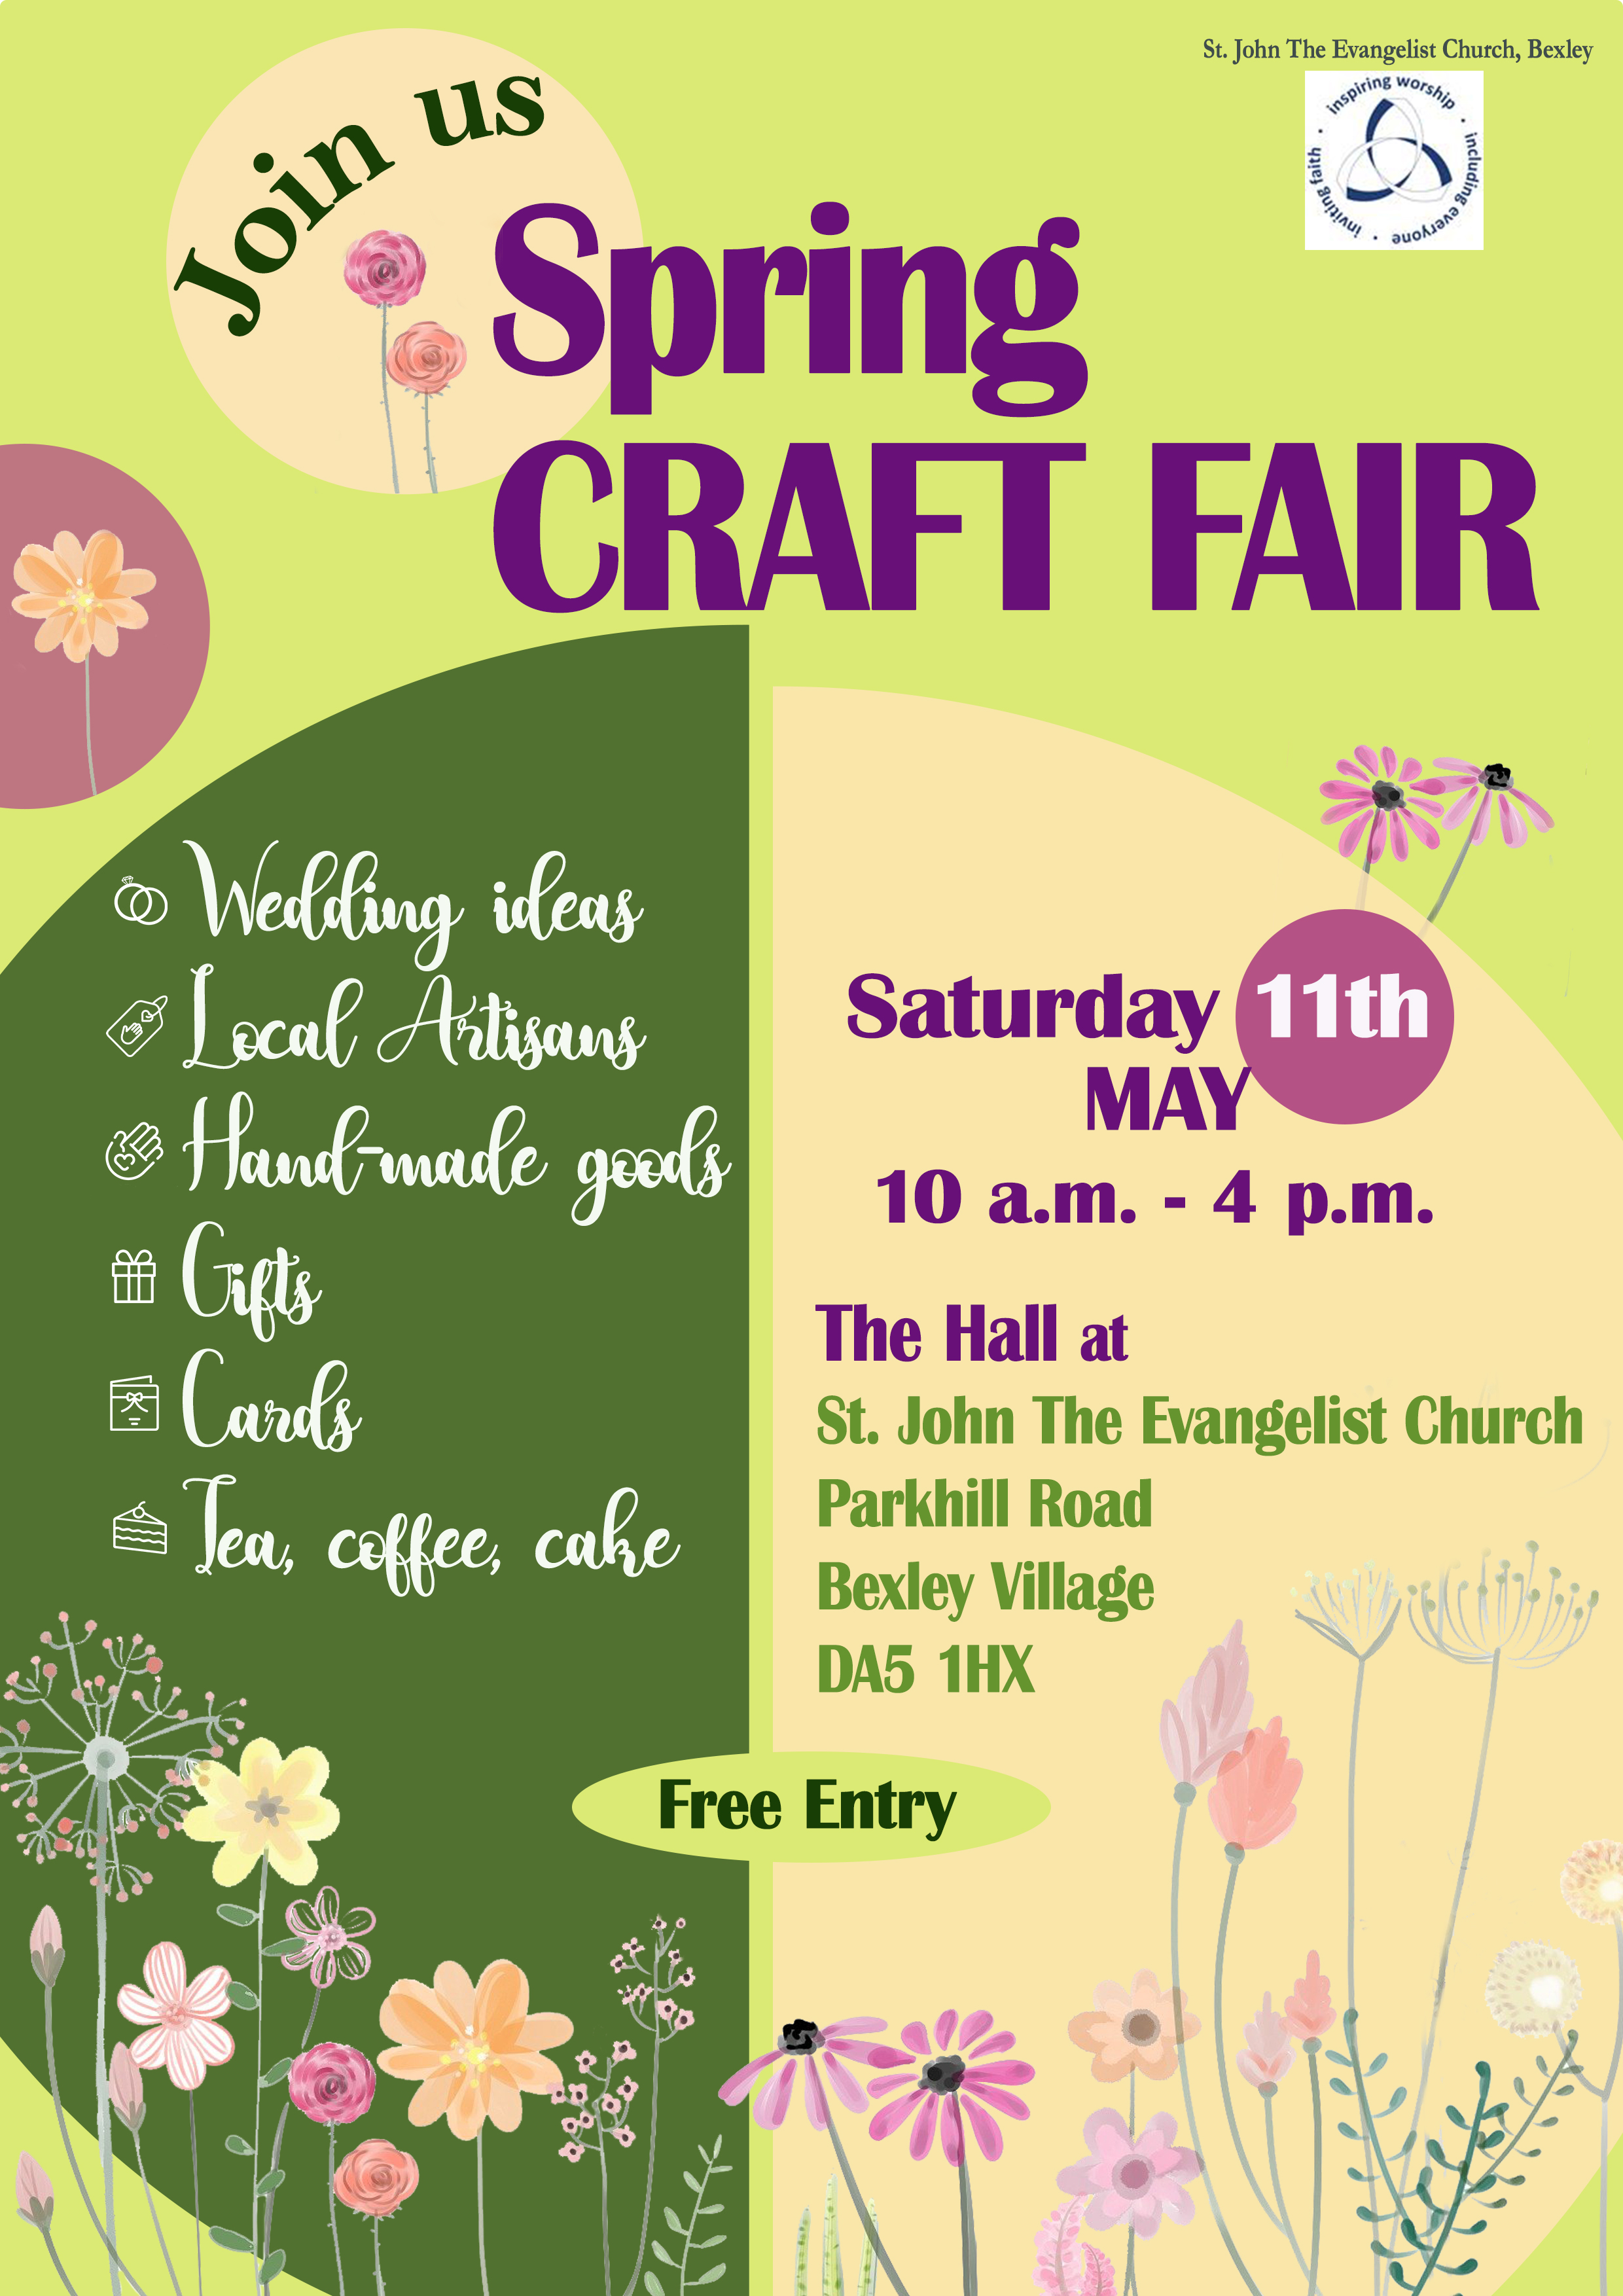 St John the Evangelist Church, Bexley. Join Us: Spring Craft Fair Wedding ideas; local artisans; hand-made-goods; gifts; cards; Tea, Coffee Cake Saturday 11th May:10am-4pm The Hall at St John the Evangelist Church: Parkhill Road, Bexley Village, DA5 1HX